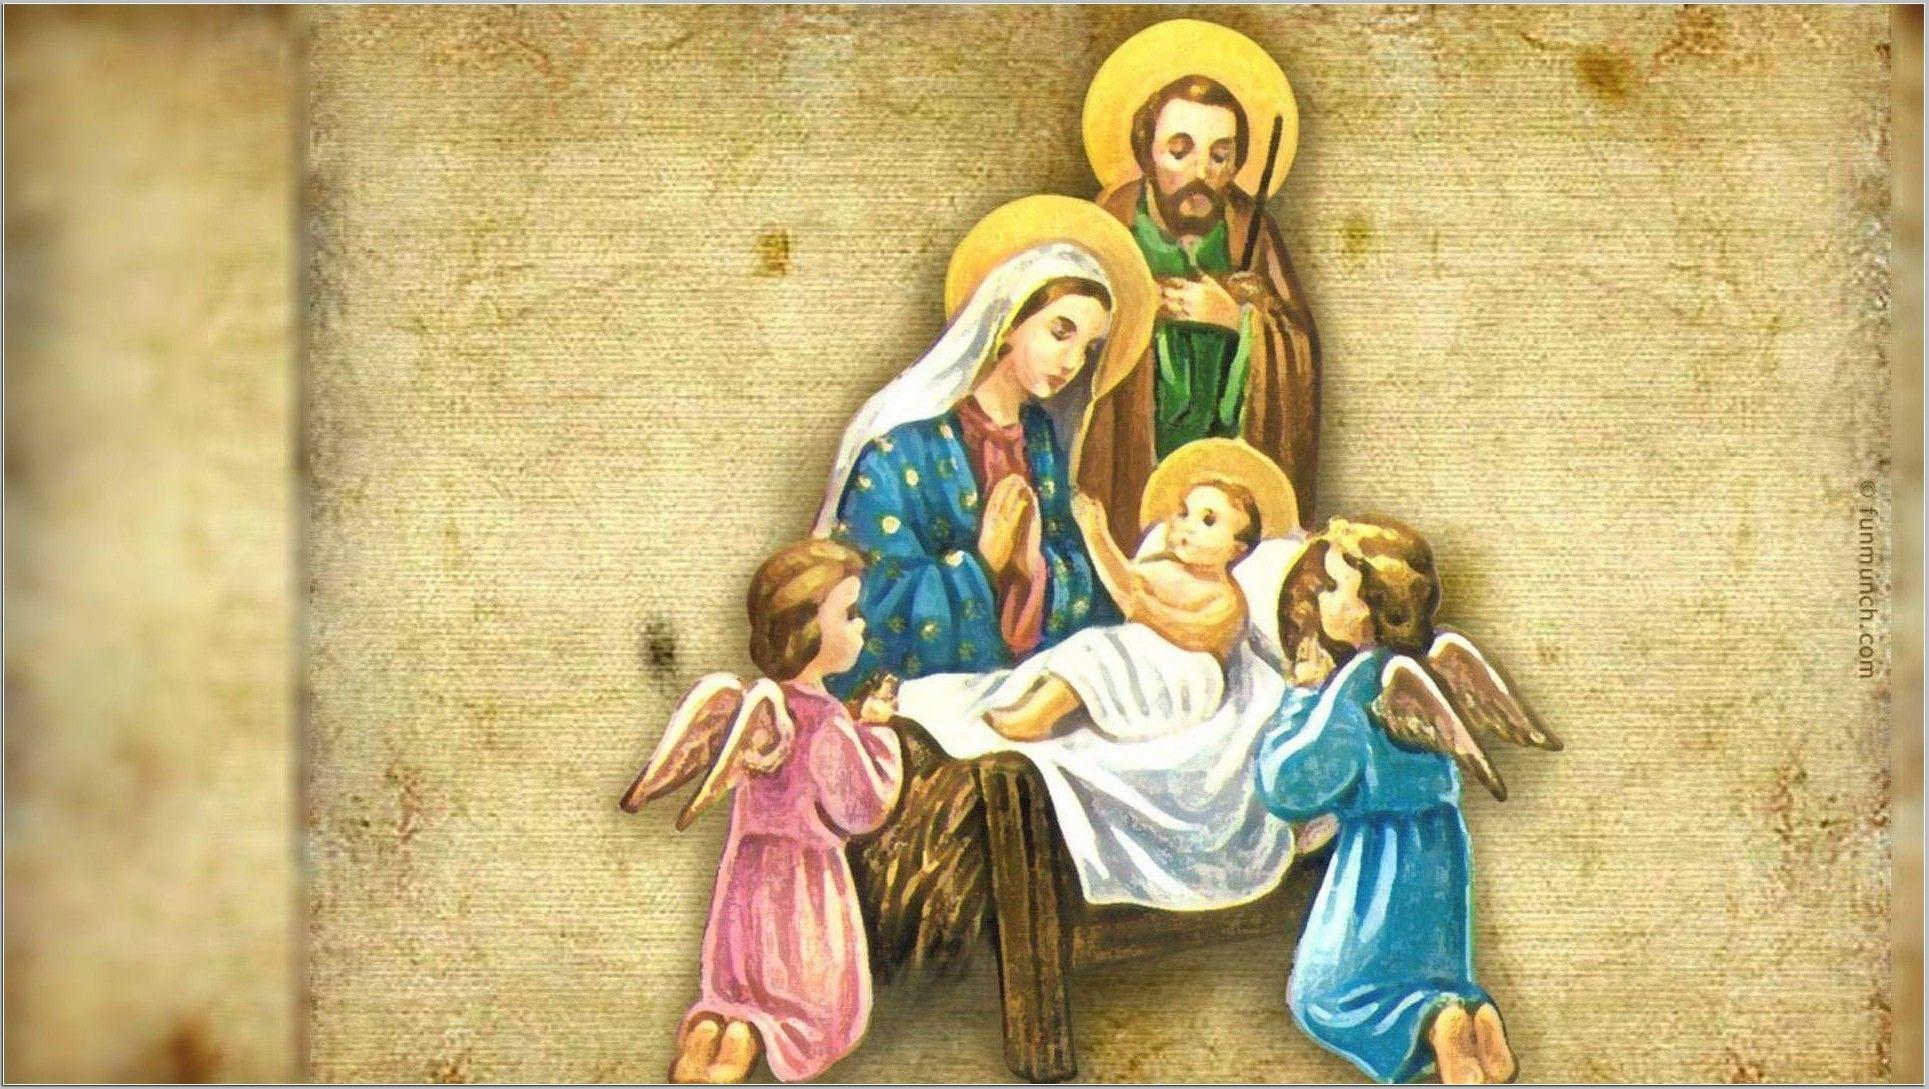 Download free catholic wallpaper 5 beautiful collection